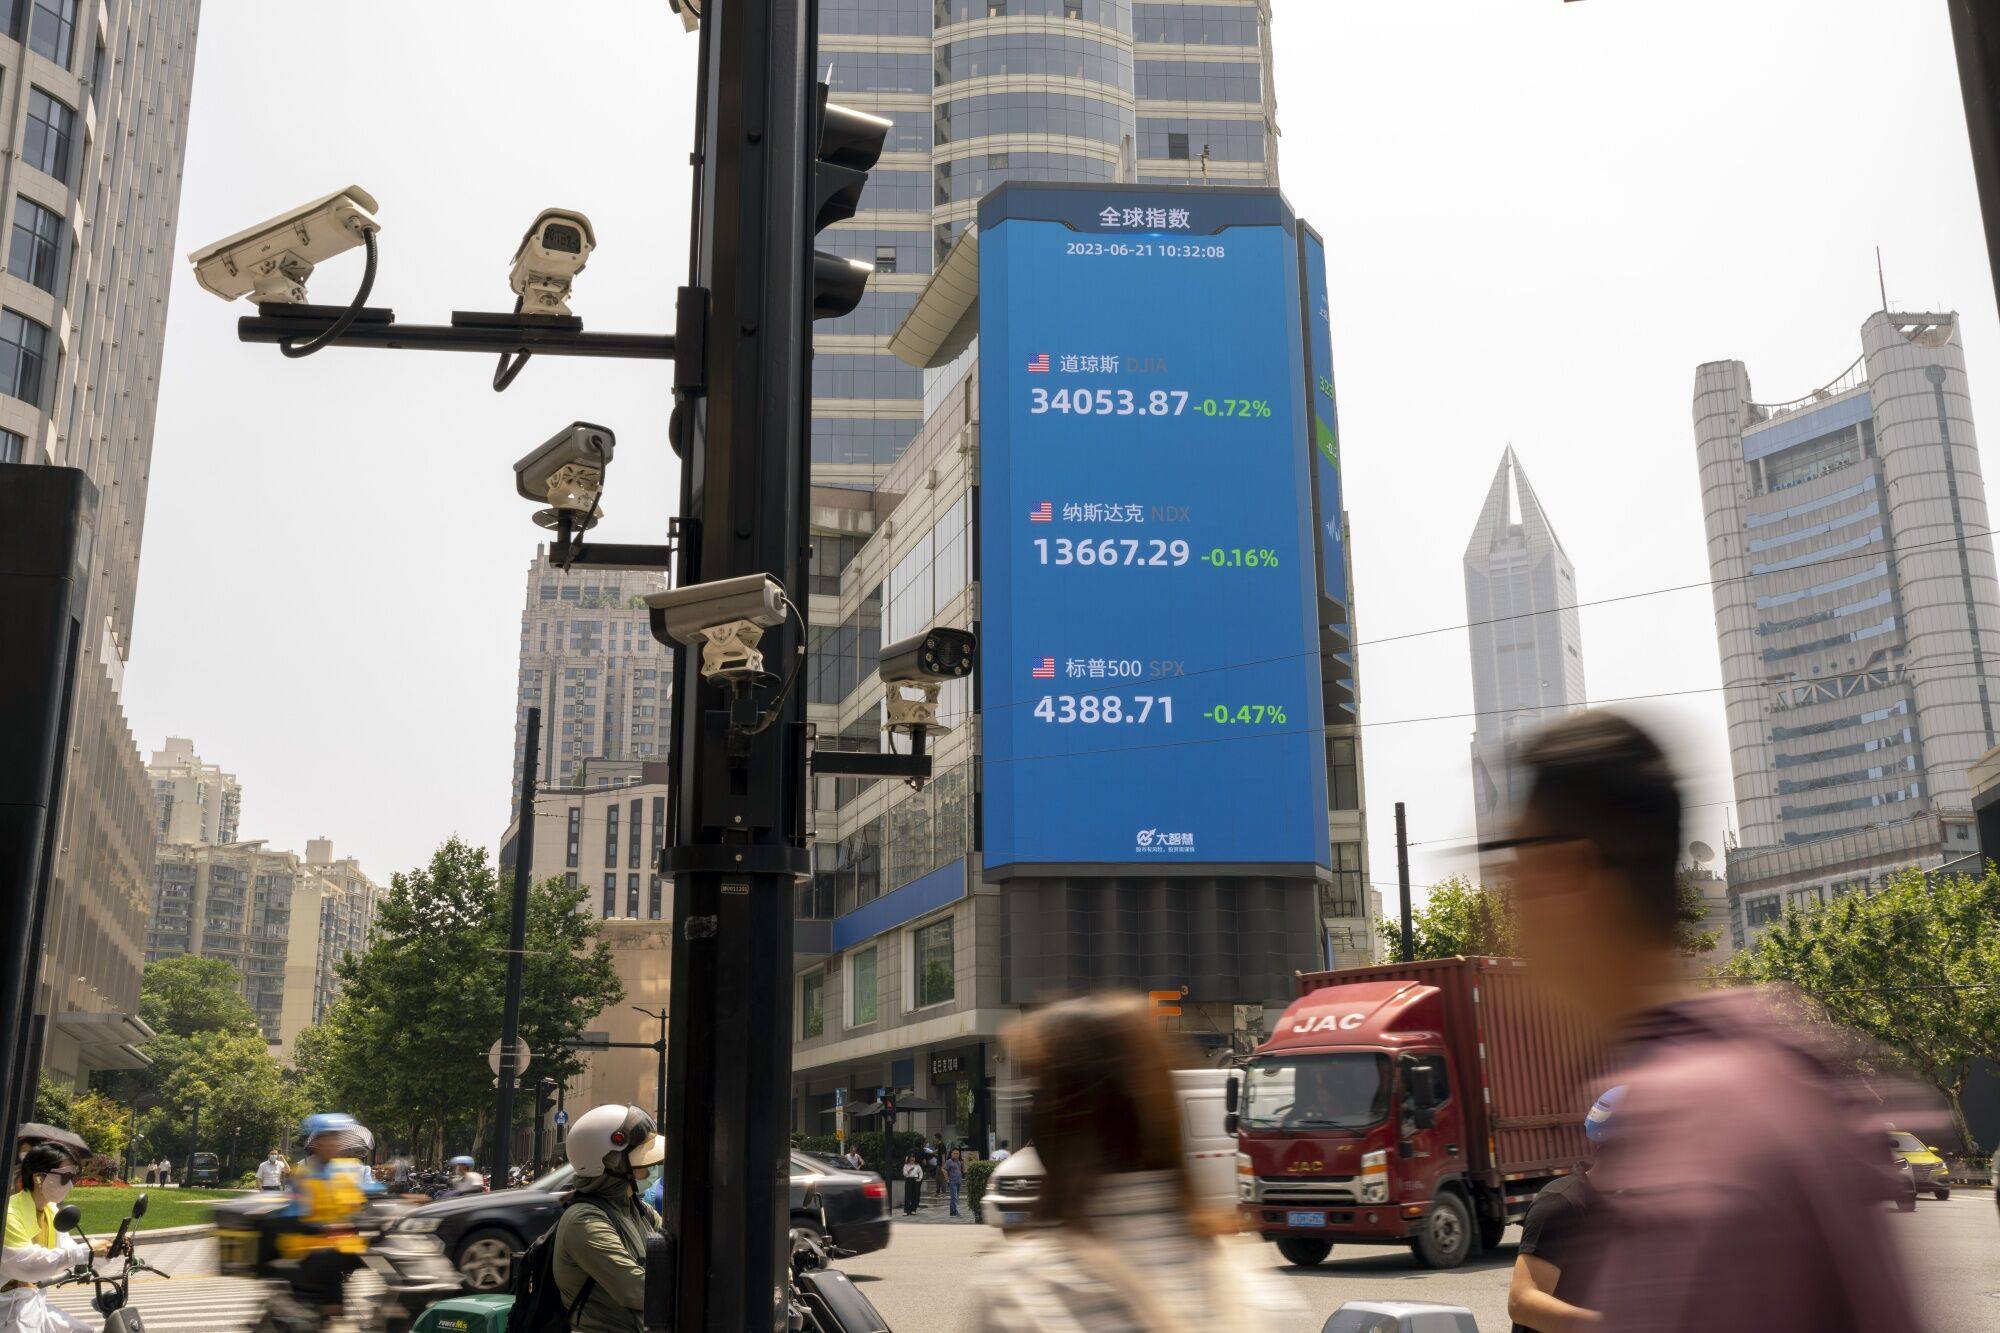 A large screen displays stock figures in Shanghai’s Lujiazui financial district. Photo: Bloomberg